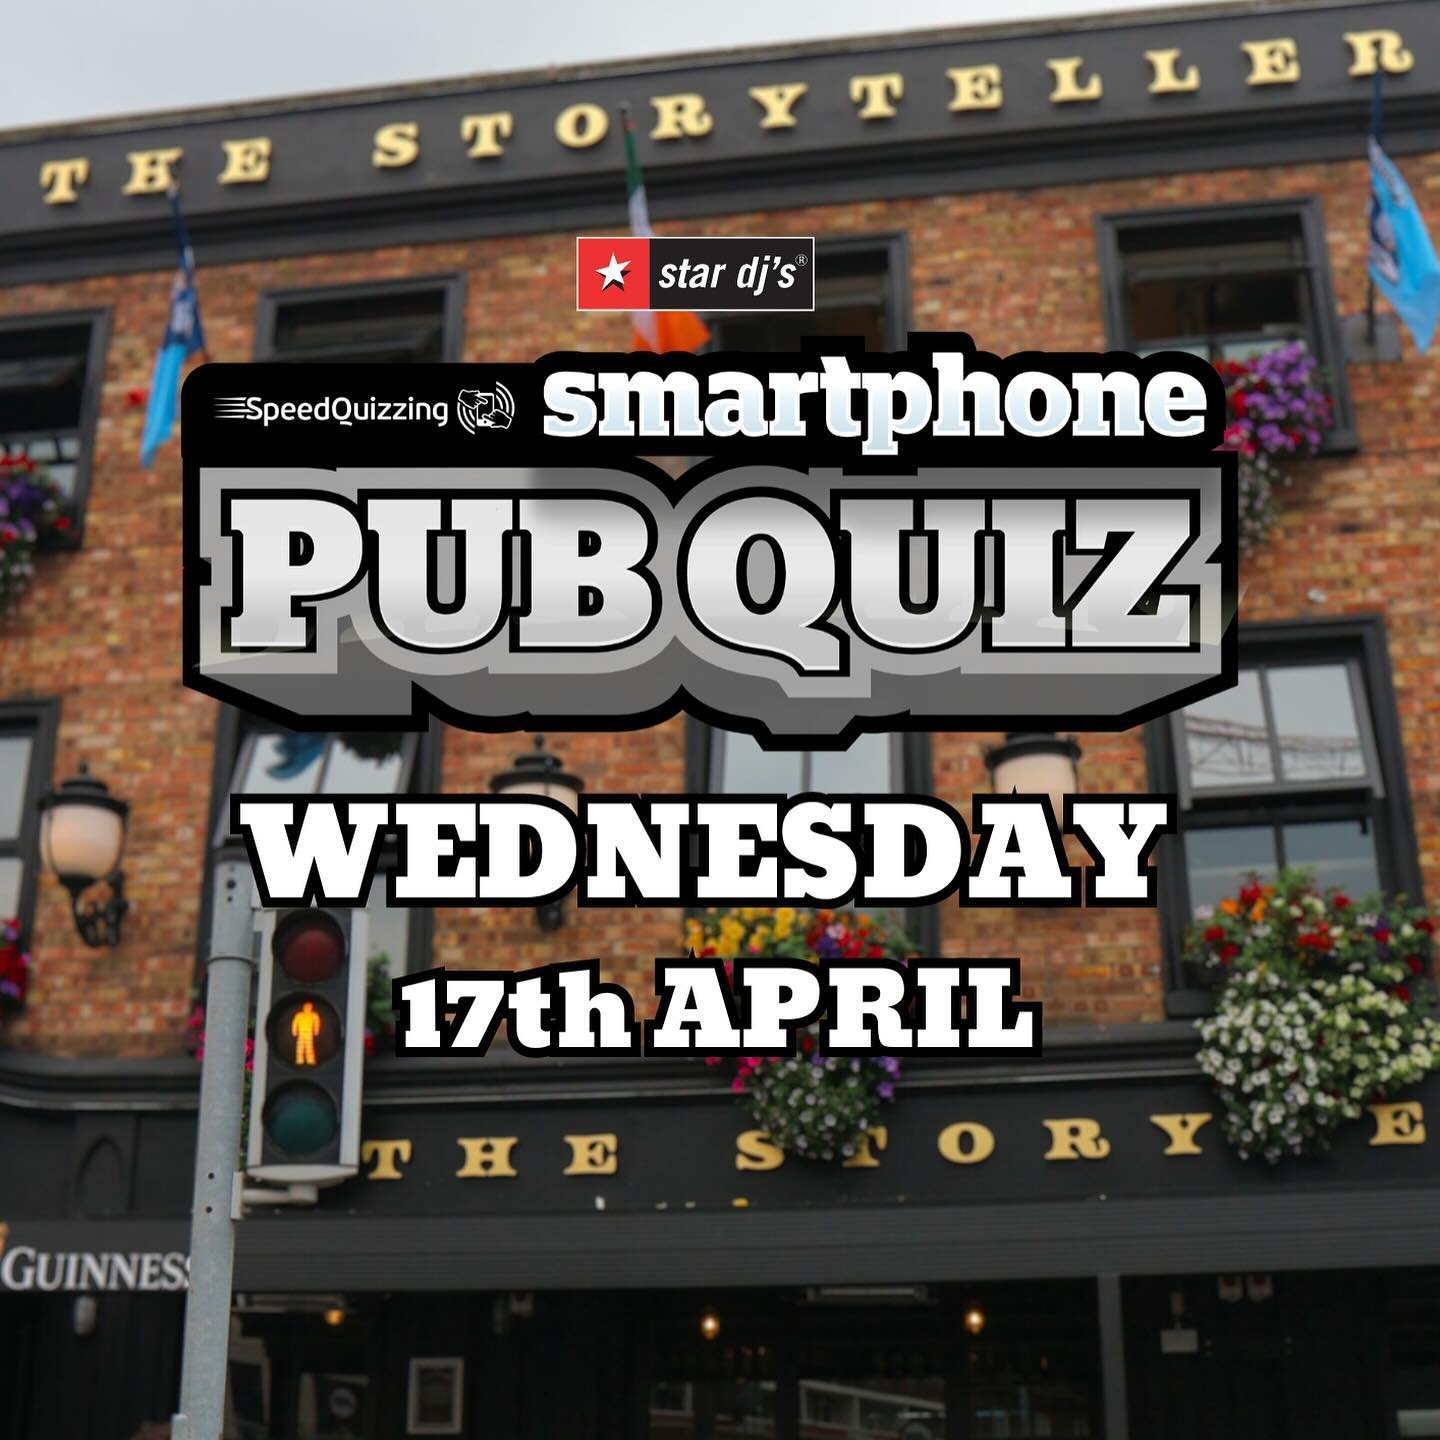 We&rsquo;re having a pub quiz here in The Storyteller🏆

We&rsquo;ll be kicking it off at 8pm this Wednesday (17th) - The first ever Storyteller pub quiz and you&rsquo;re all invited to have the craic and win a few spot prizes along the way 🏆🍻

Gra